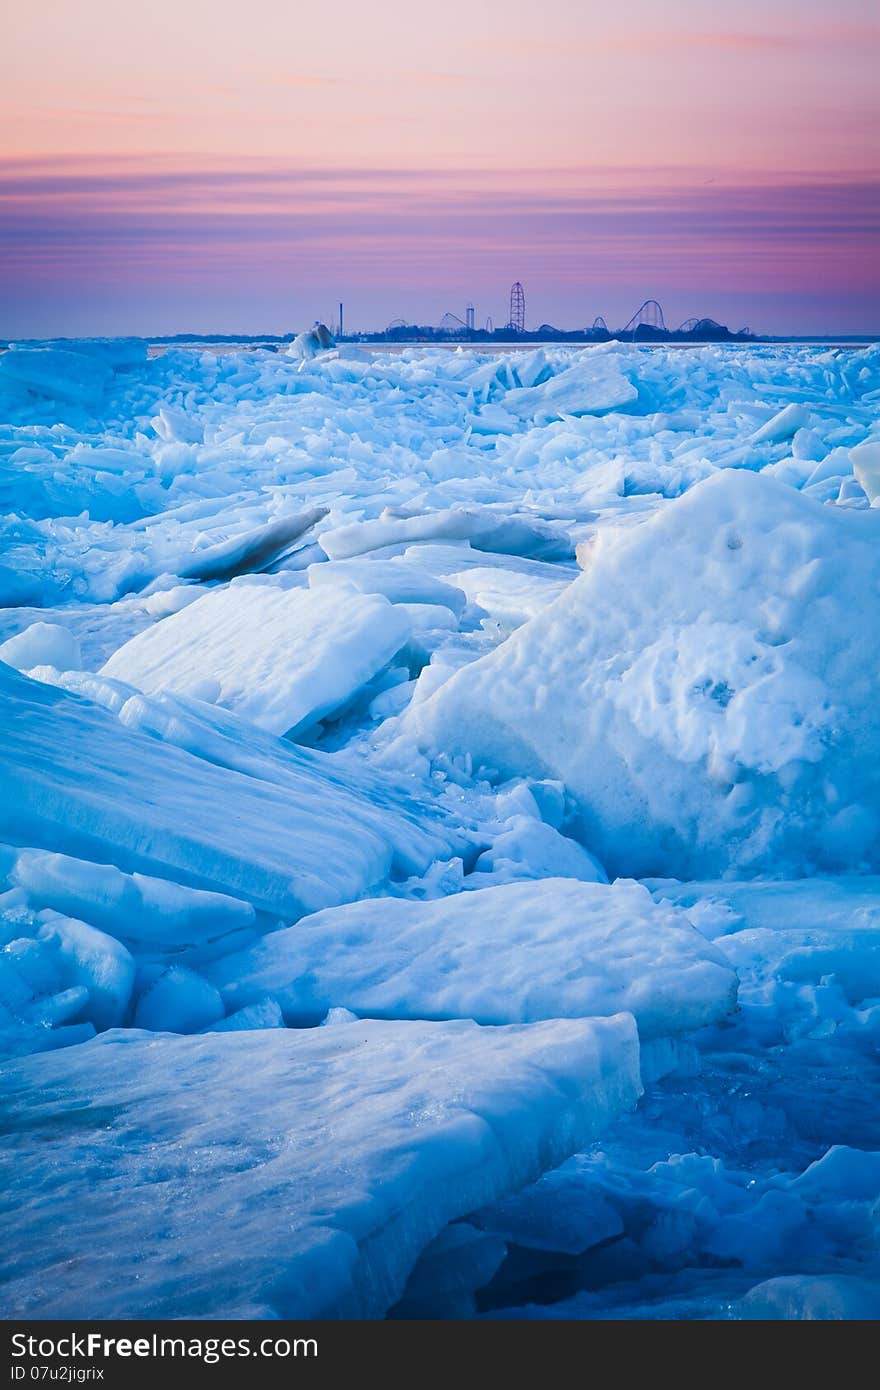 A view of Lake Erie ice during late winter. A view of Lake Erie ice during late winter.